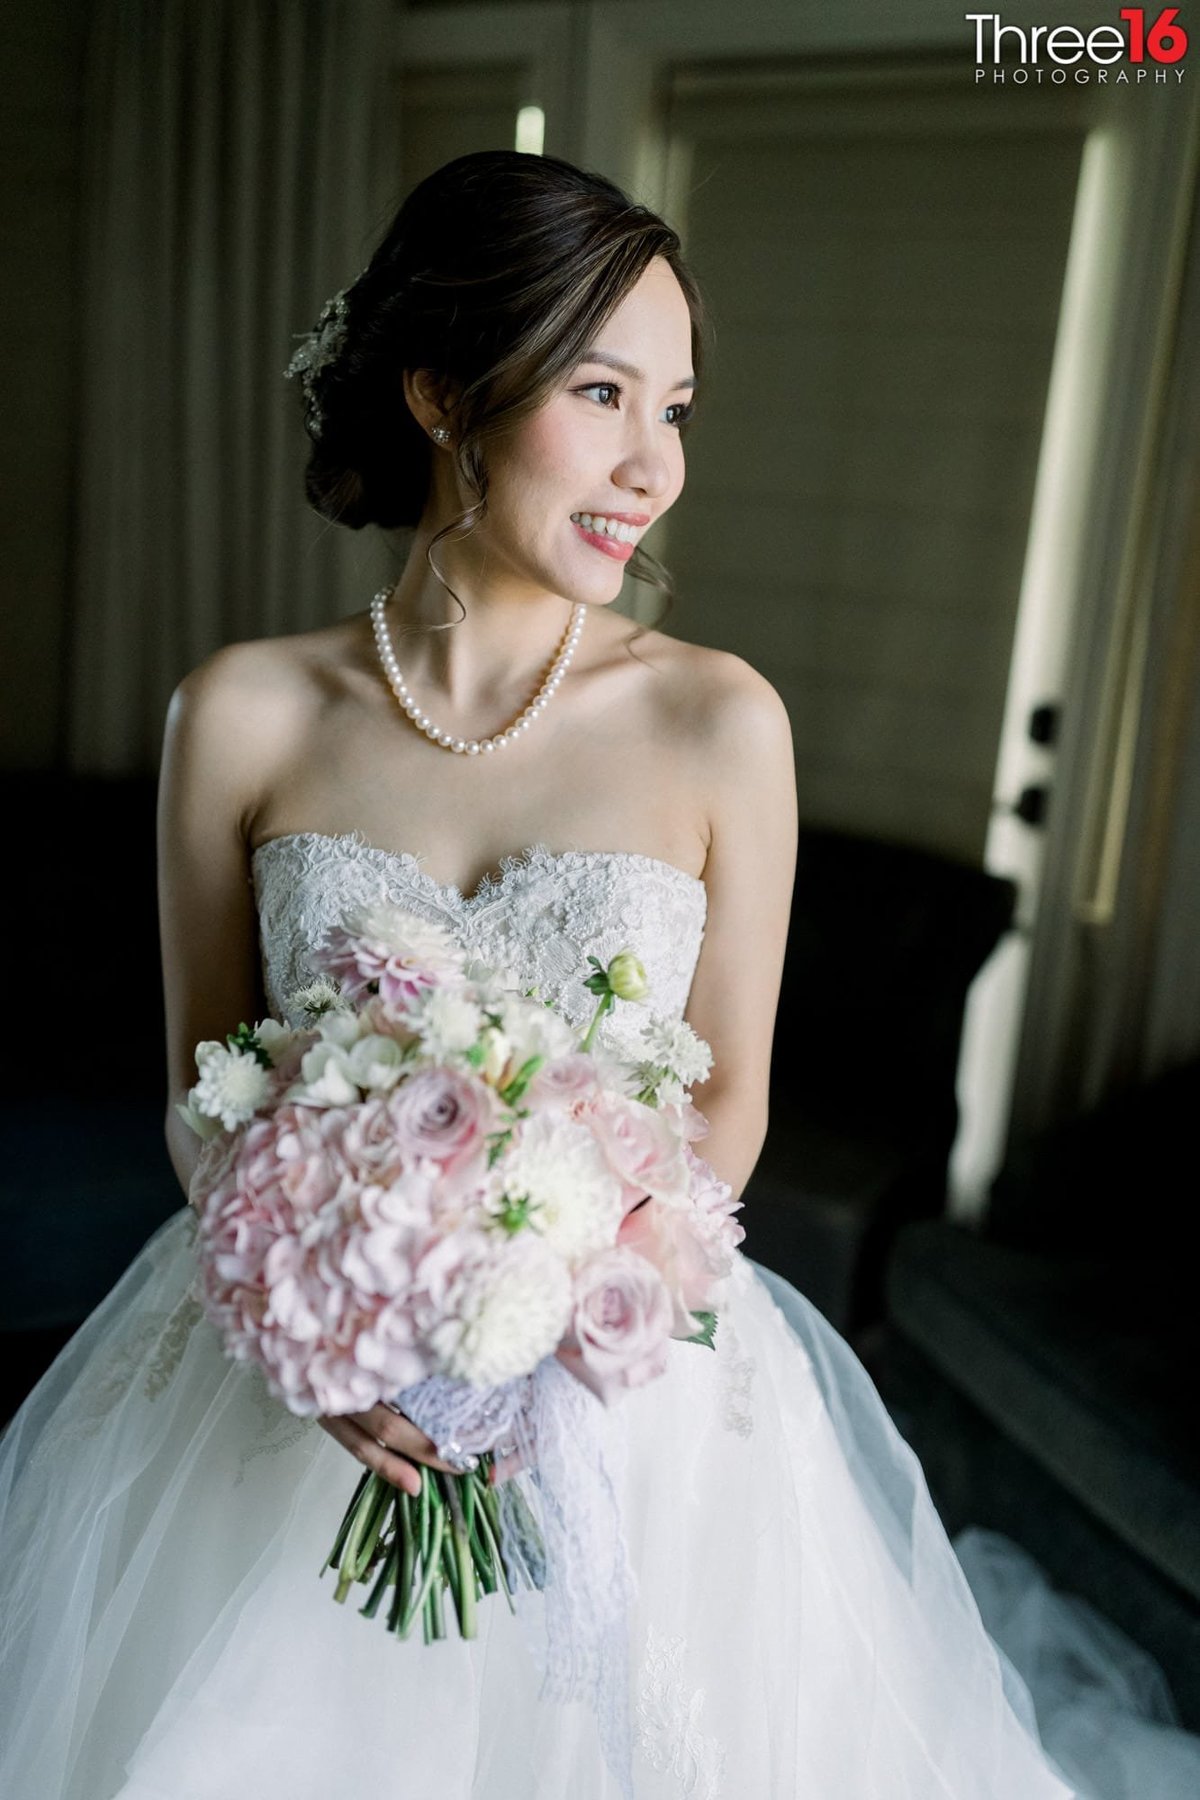 Beautiful Bride poses with her bouquet